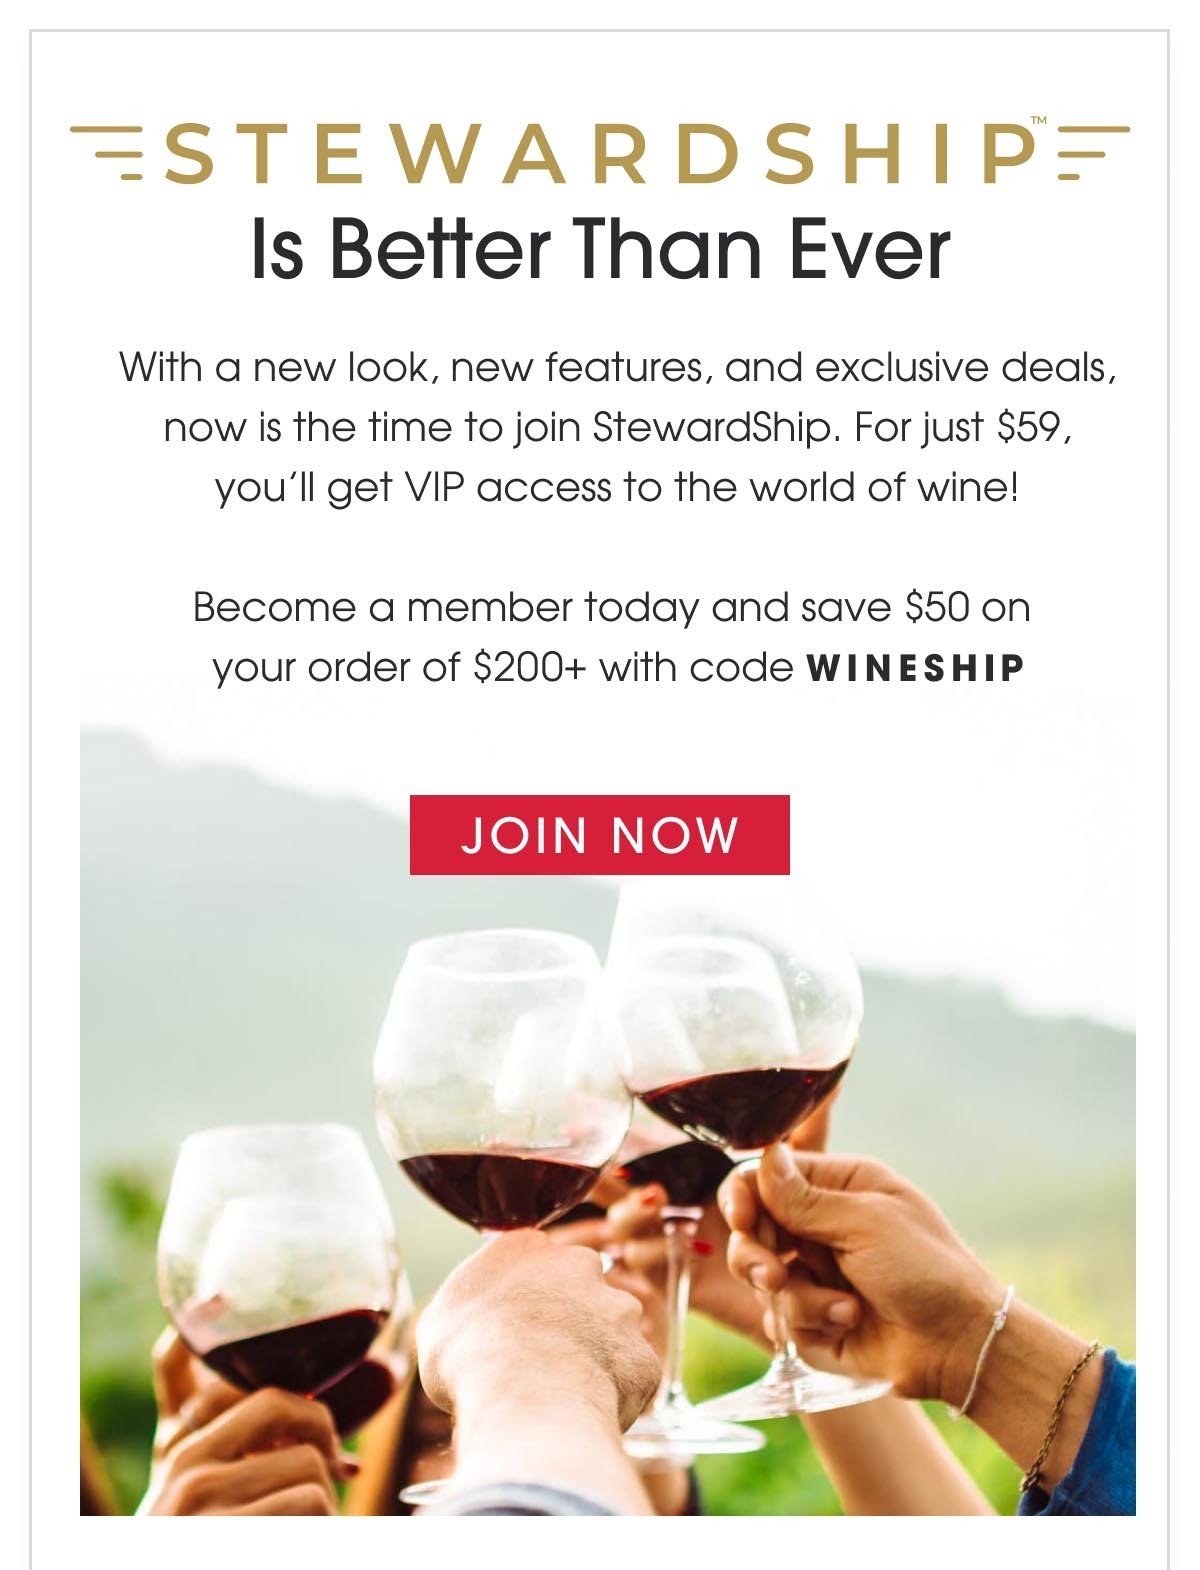 StewardShip is better than ever - Become a member today and save $50 off your order of $200+